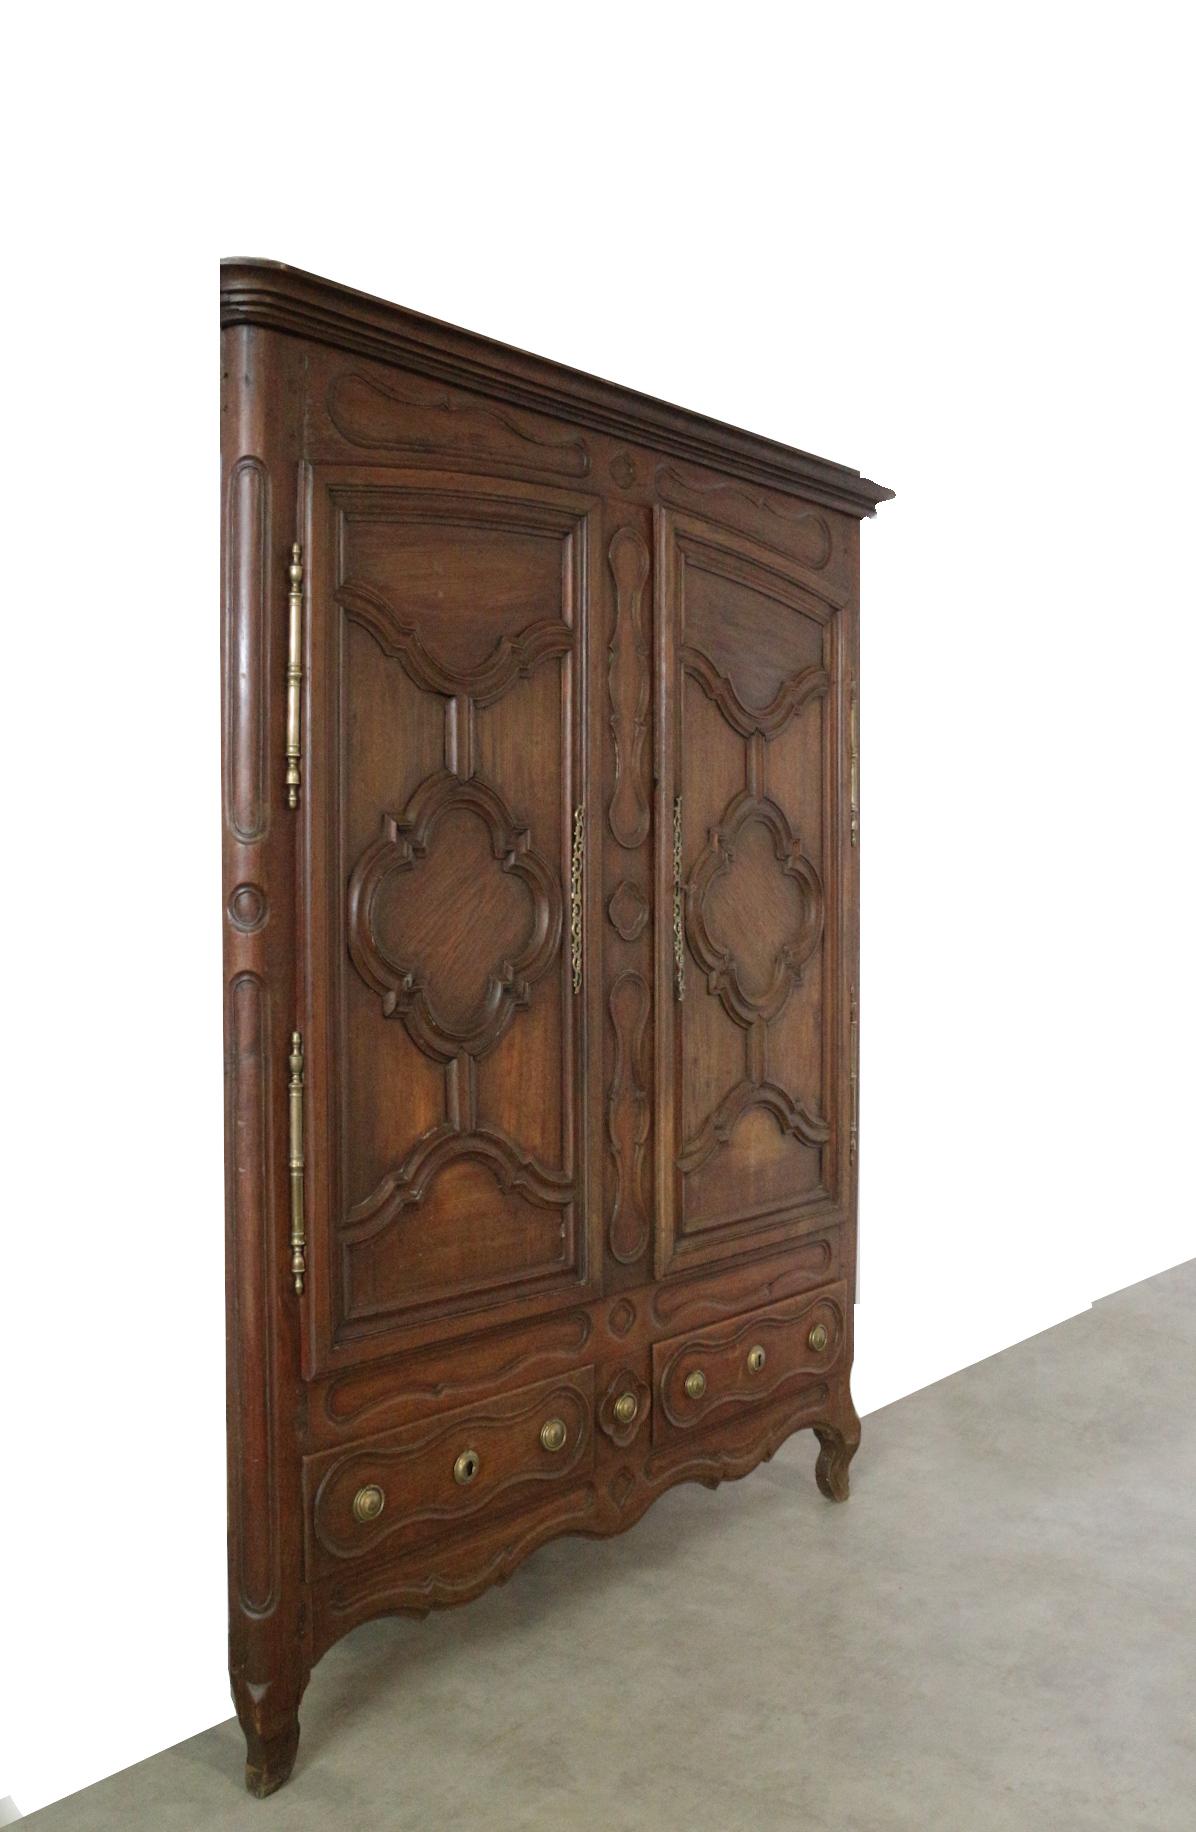 Français Antique Wall Cabinet Armoire 18th Century French Faux Front Wardrobe Carved Oak